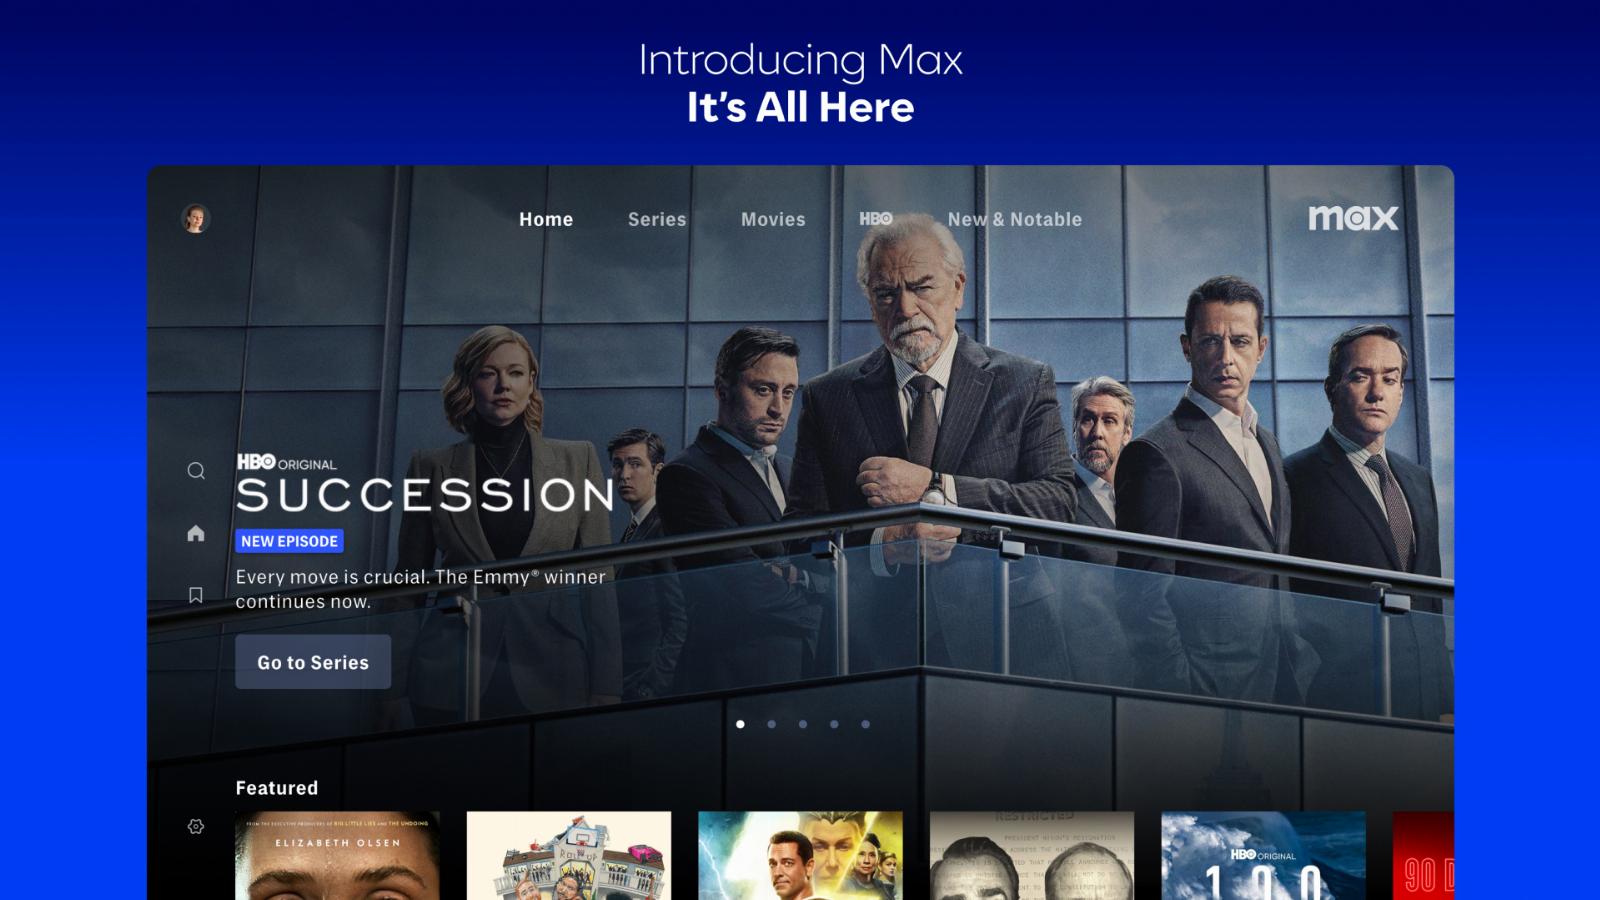 70% of HBO Max subs have moved over to rebranded Max service